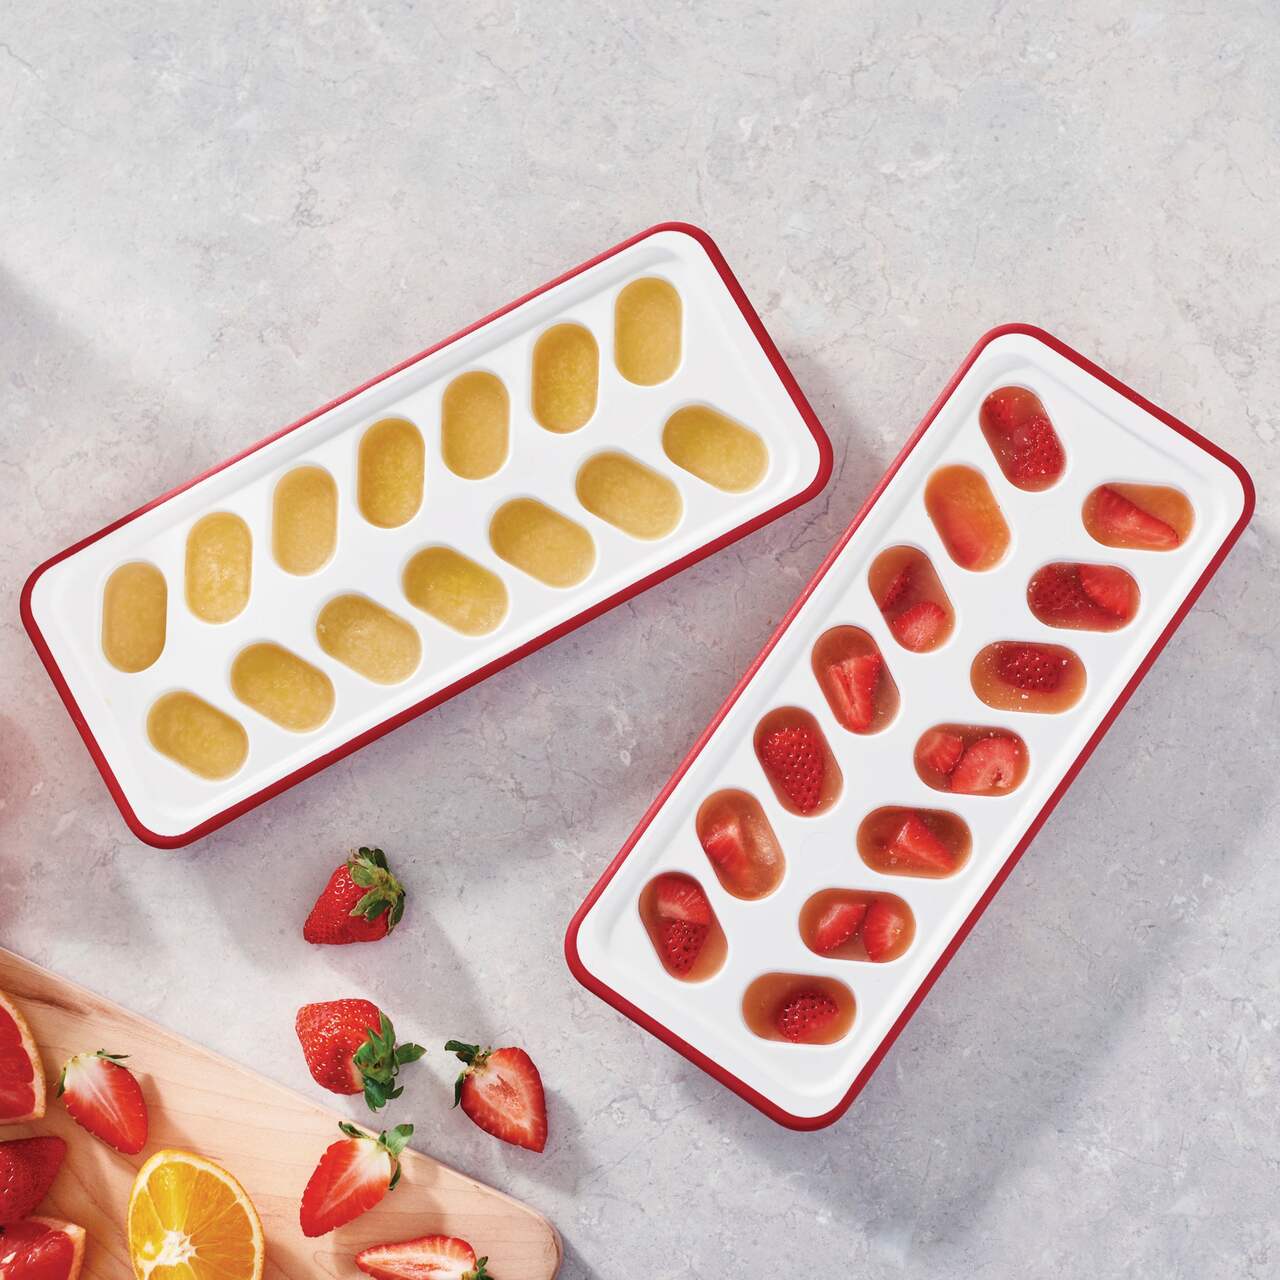 https://media-www.canadiantire.ca/product/living/kitchen/food-storage/1427365/rubbermaid-flexible-ice-cube-tray-603141af-a9da-45c0-ab08-274645dc9108-jpgrendition.jpg?imdensity=1&imwidth=1244&impolicy=mZoom